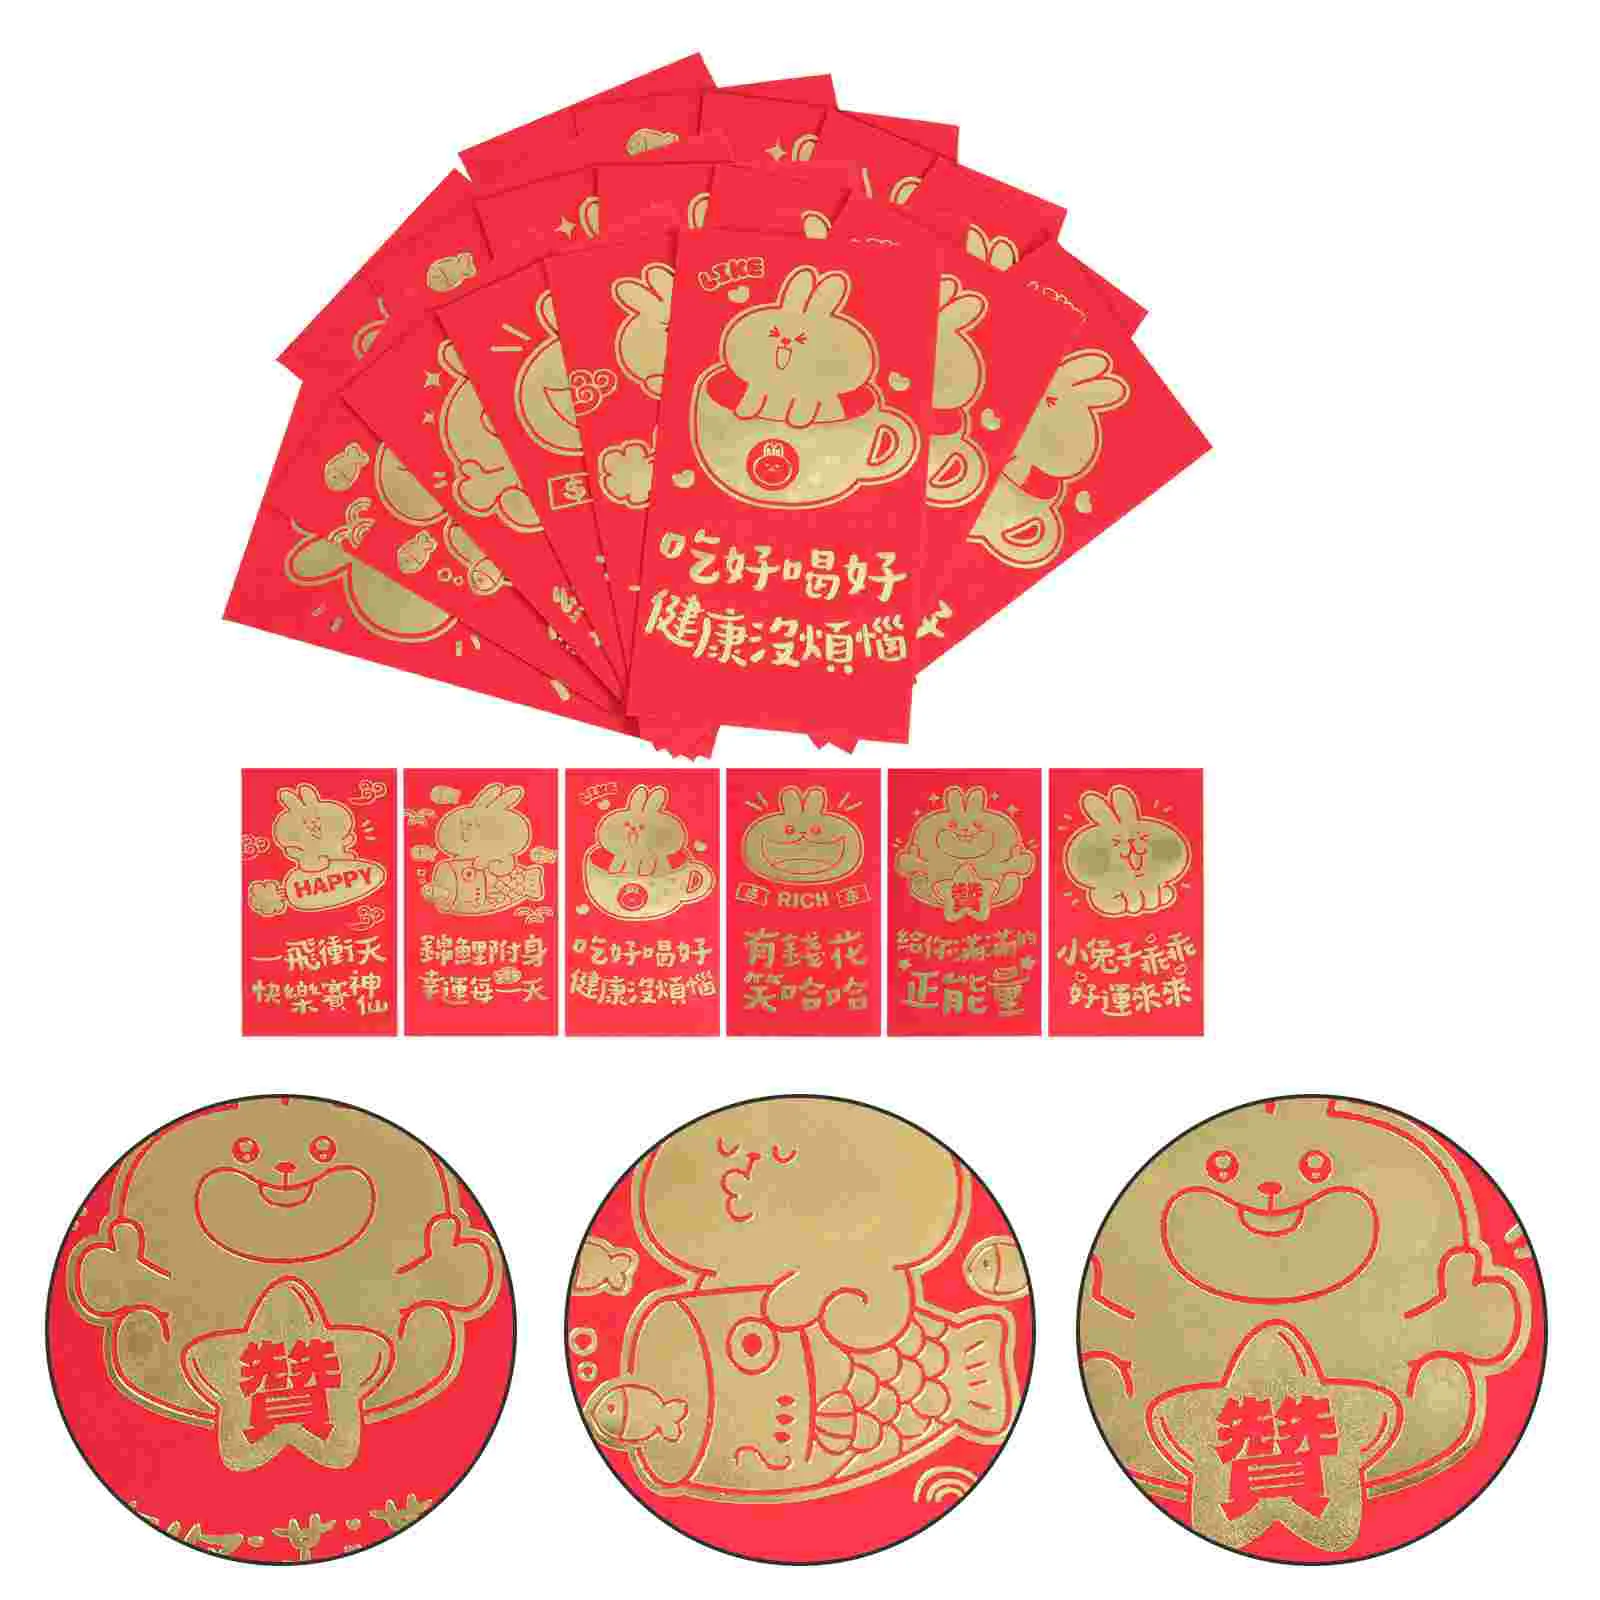 

Red Year Rabbit Packet Money Packets Envelopes Festival Bag New Envelope Spring Gift Zodiac Paper Hongbao Cash Luck Chinese